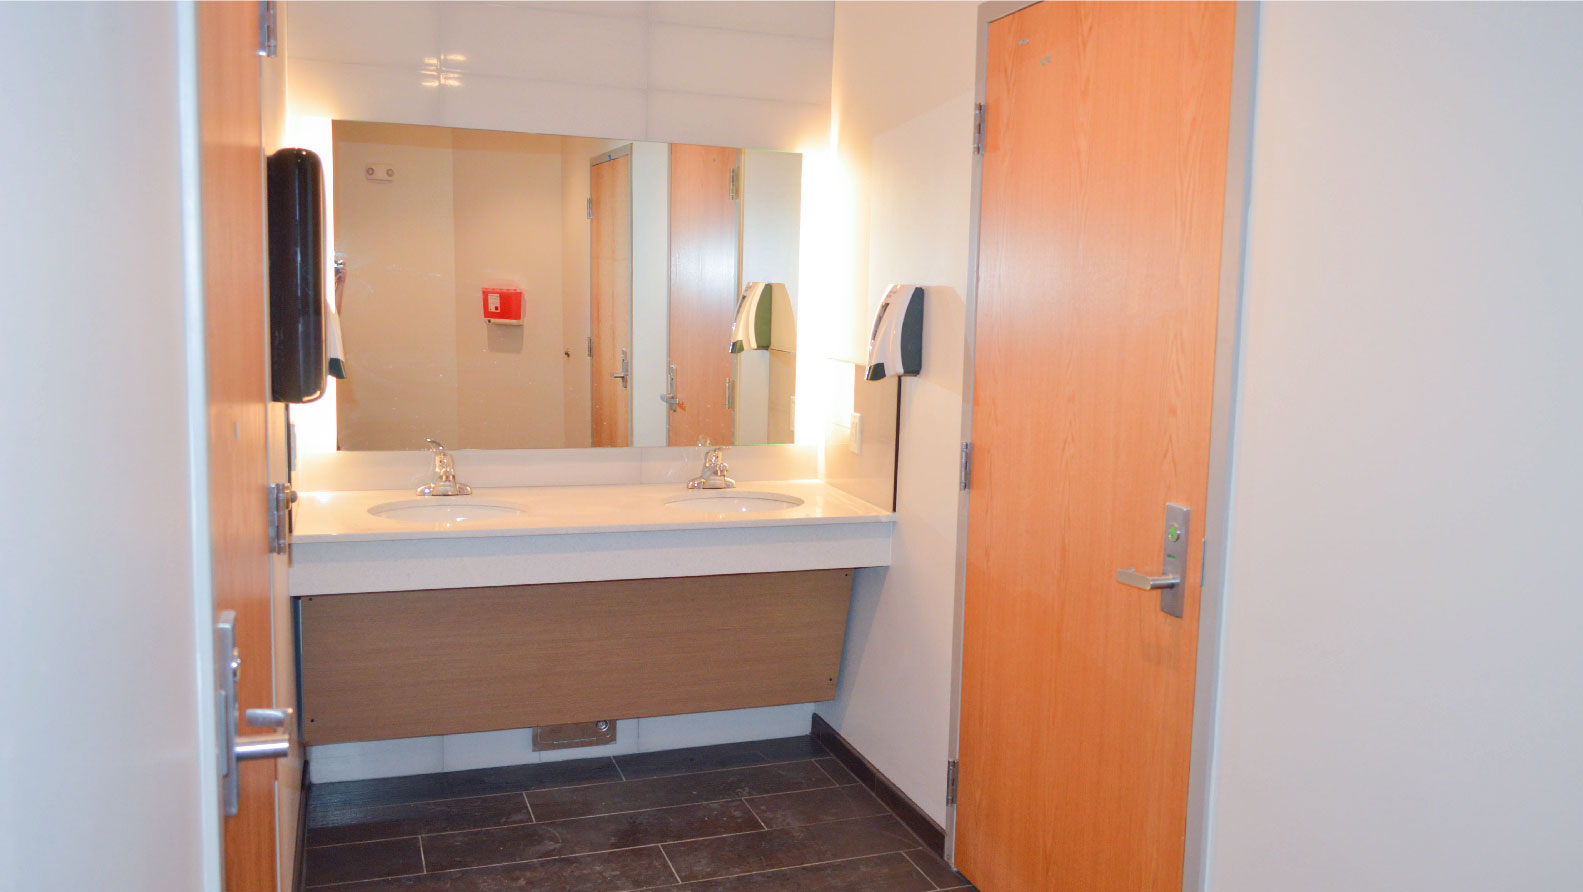 Heitz single user private bathroom common area with sinks and mirror